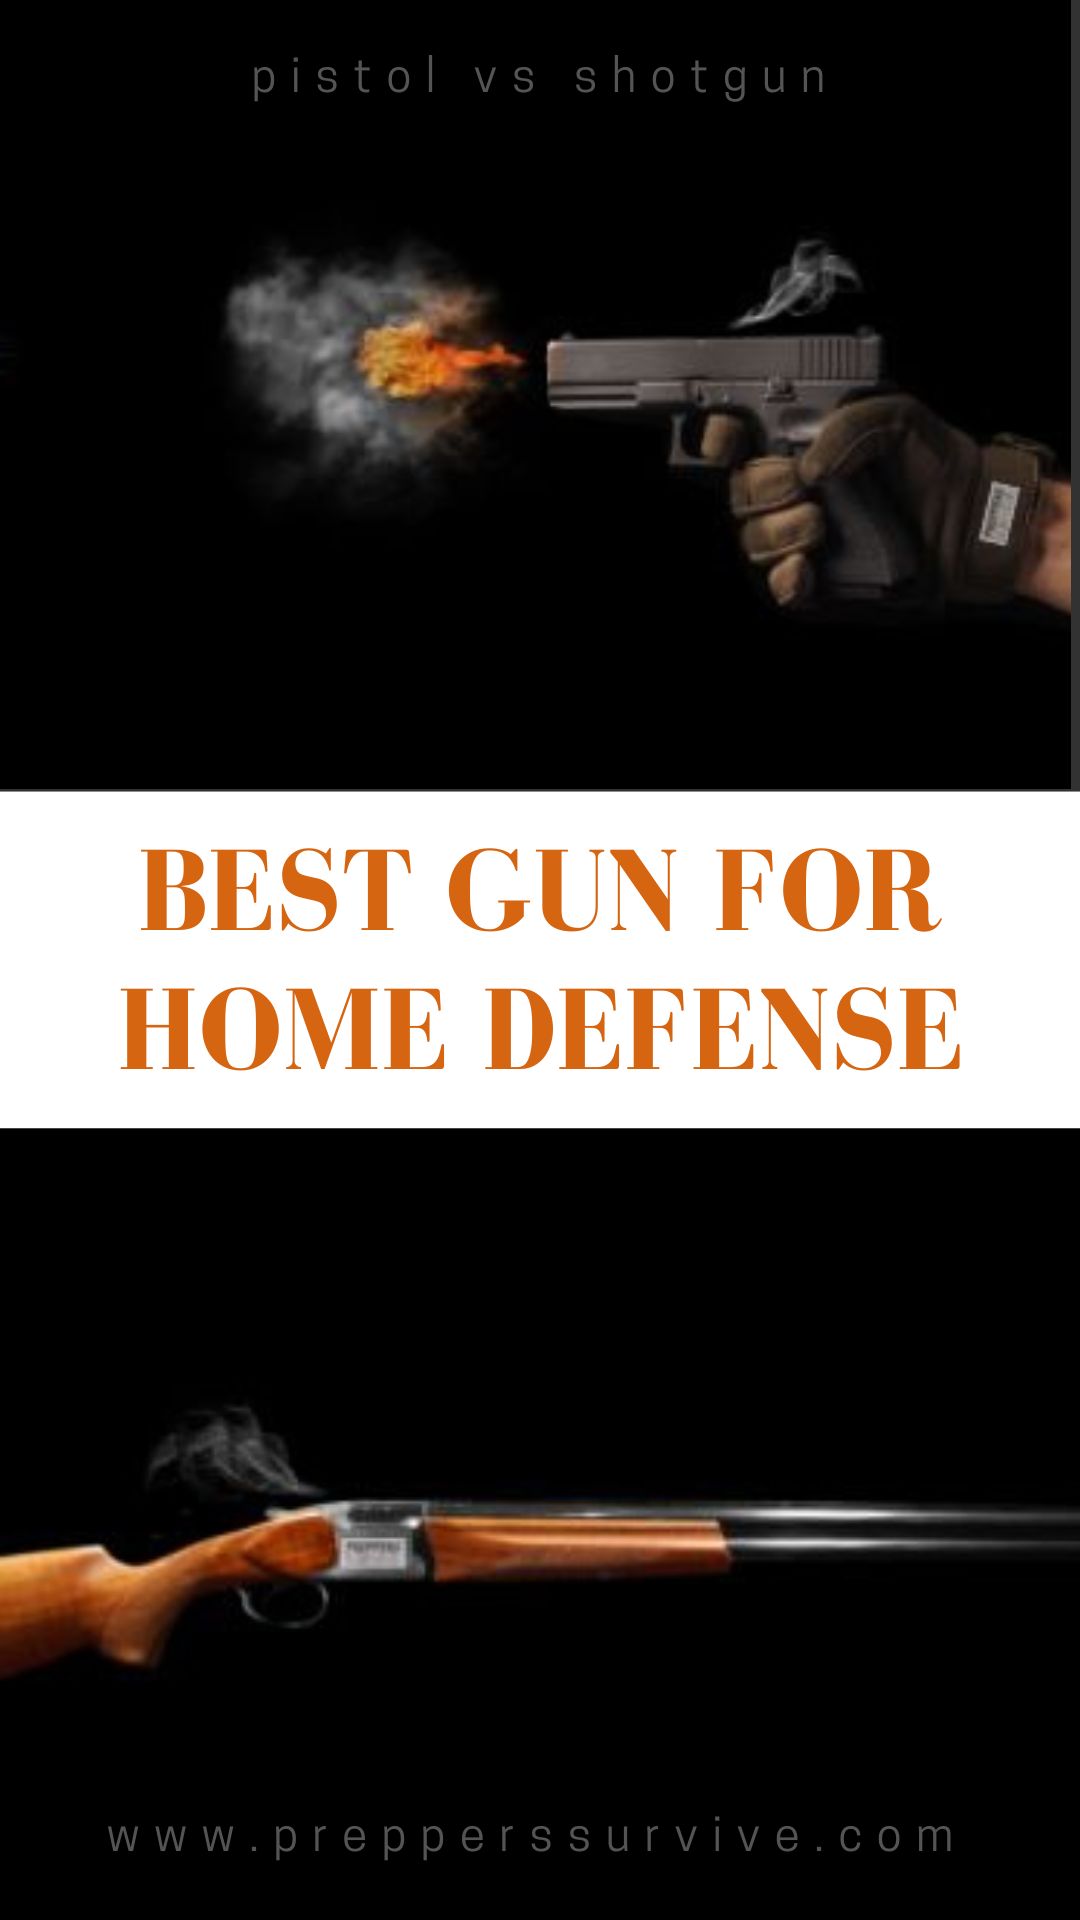 Home defense weapons -Best Gun for Home Defense